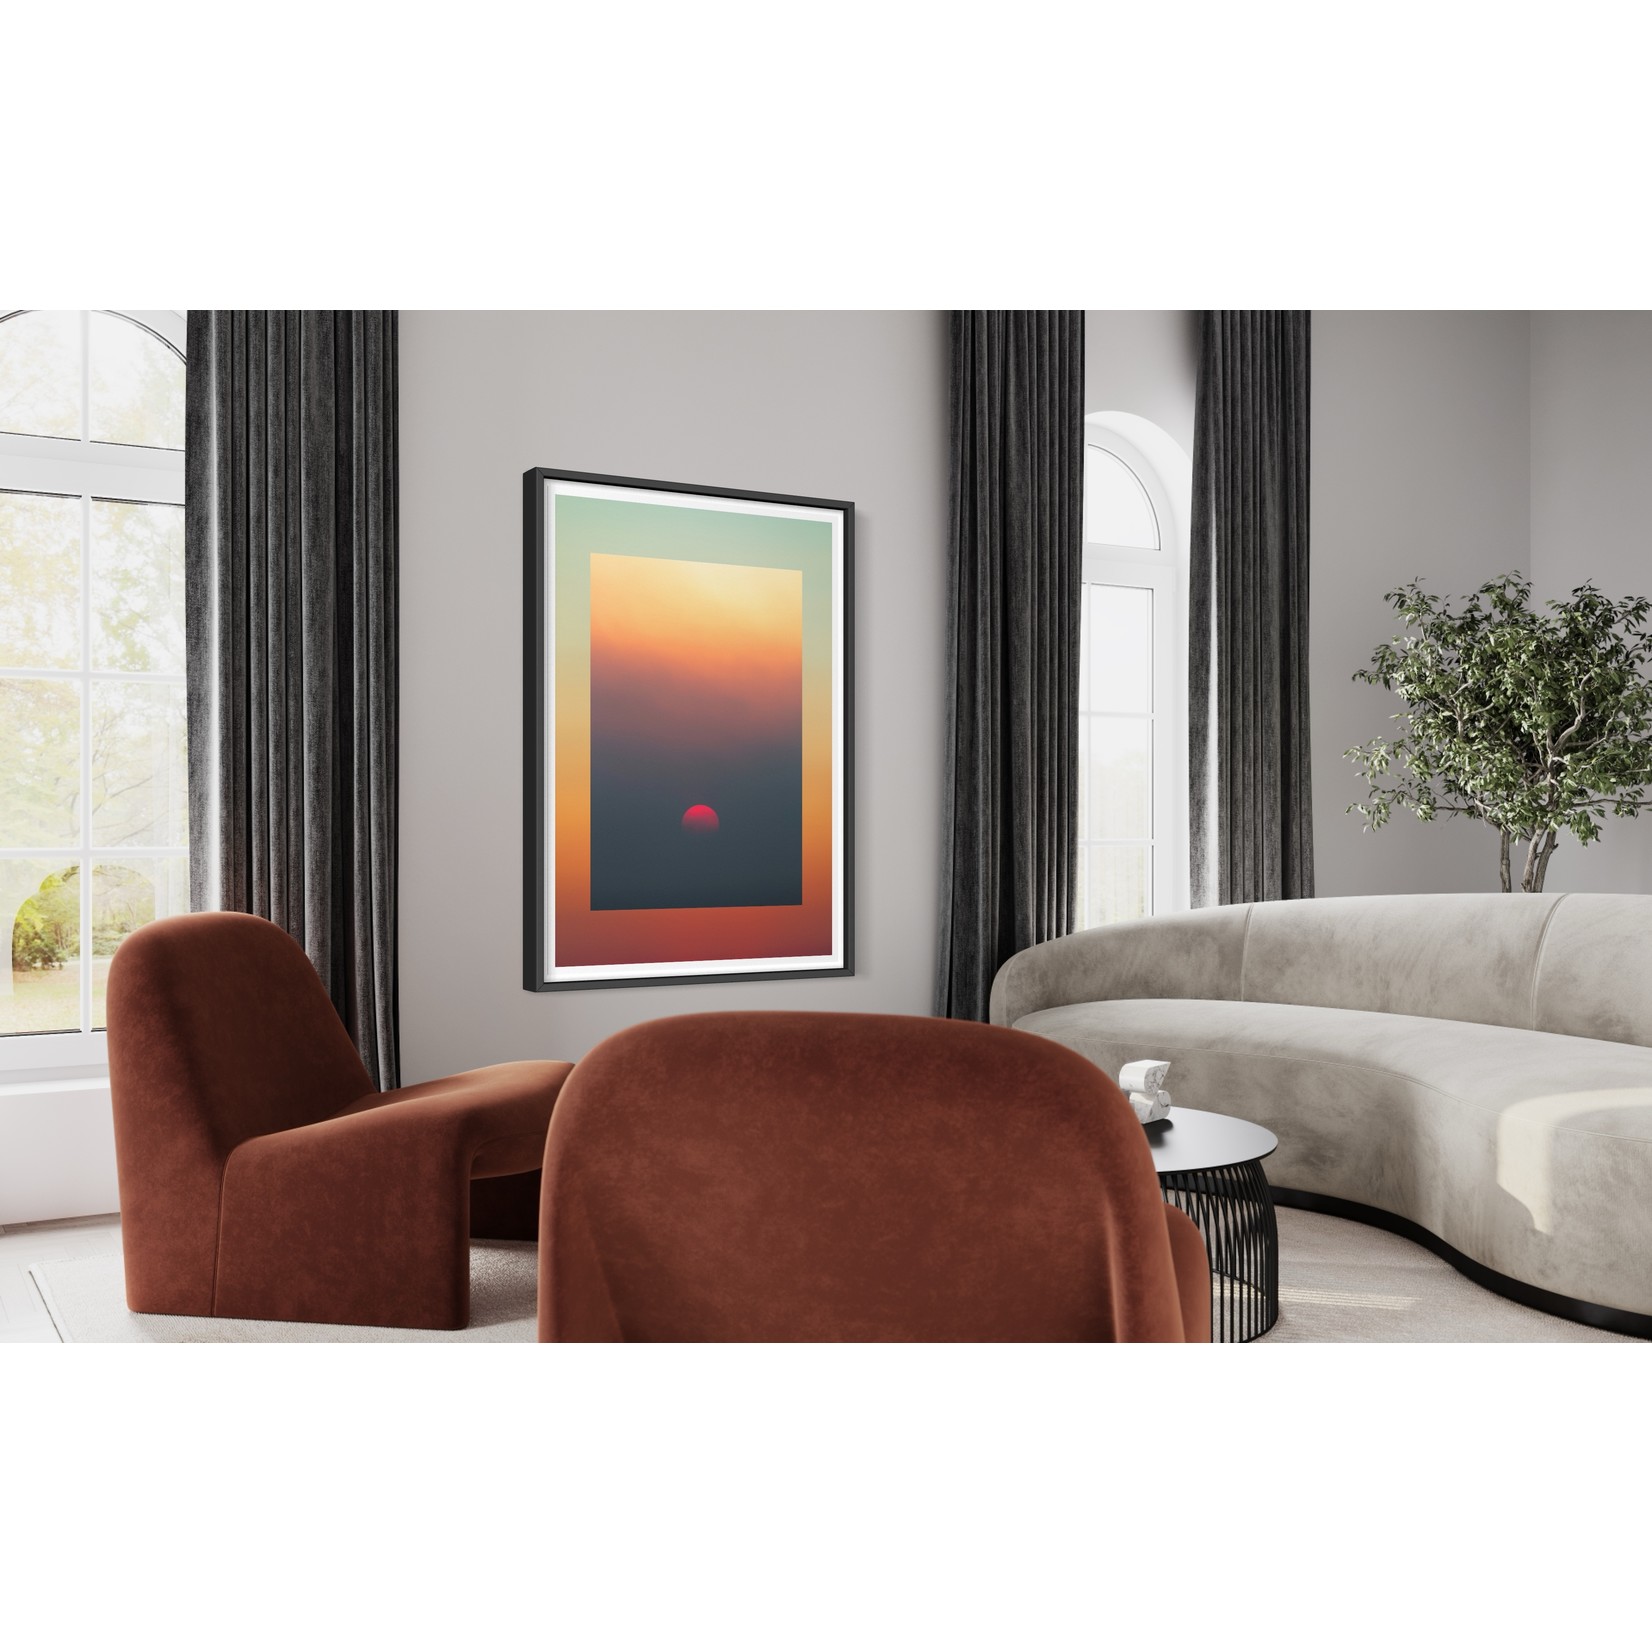 The Picturalist | Fine Art Print on Rag Paper Red Moon Sunset by Francesco Alessandrini